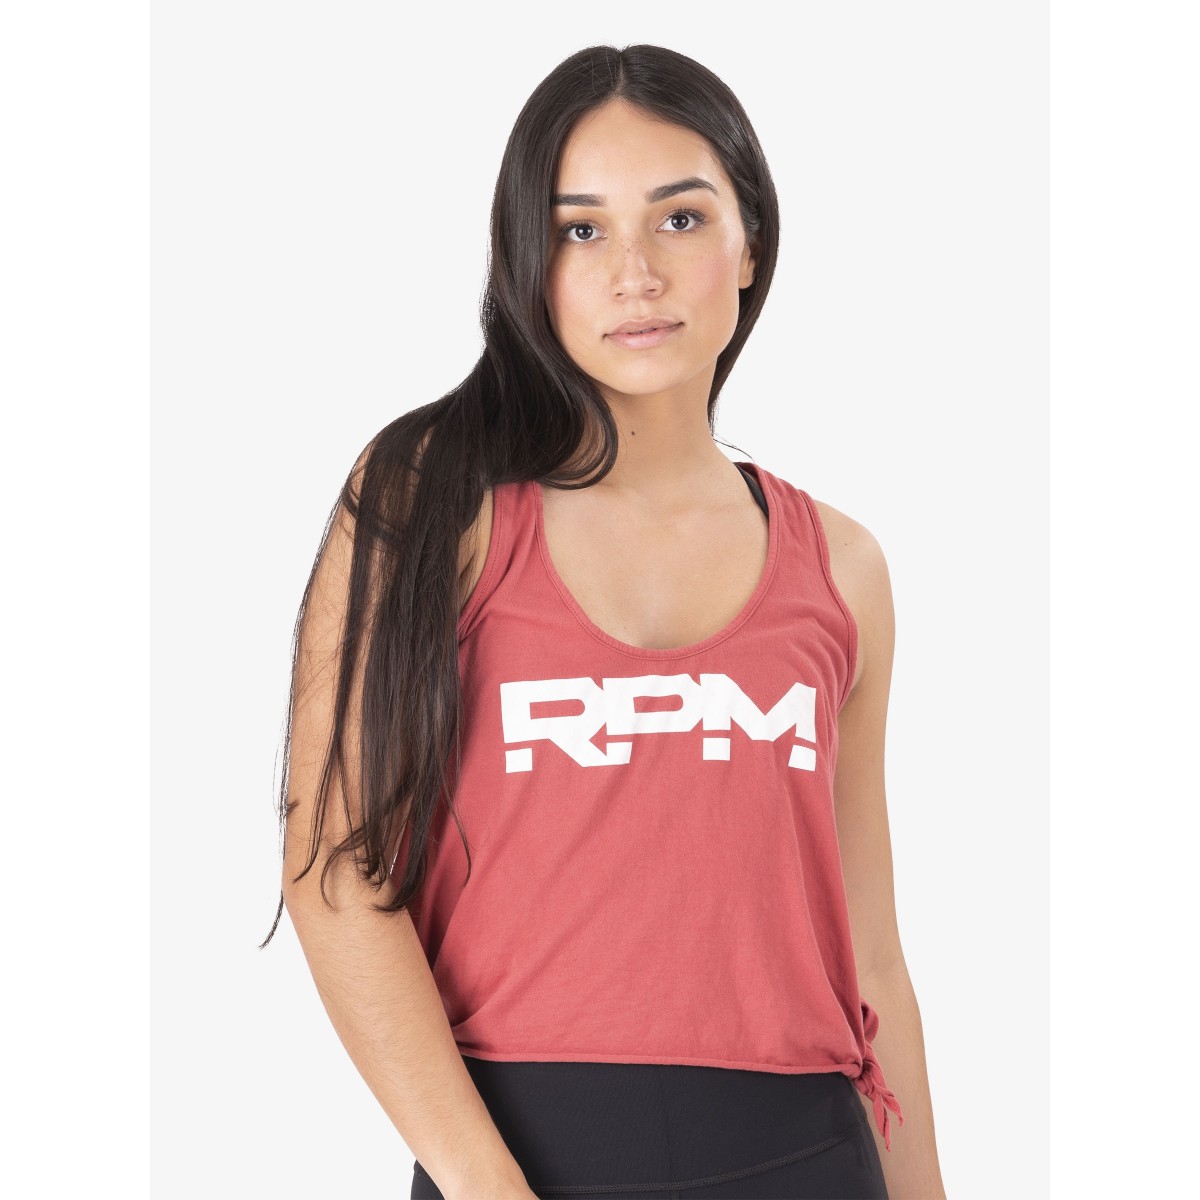 Statement Red River Tank